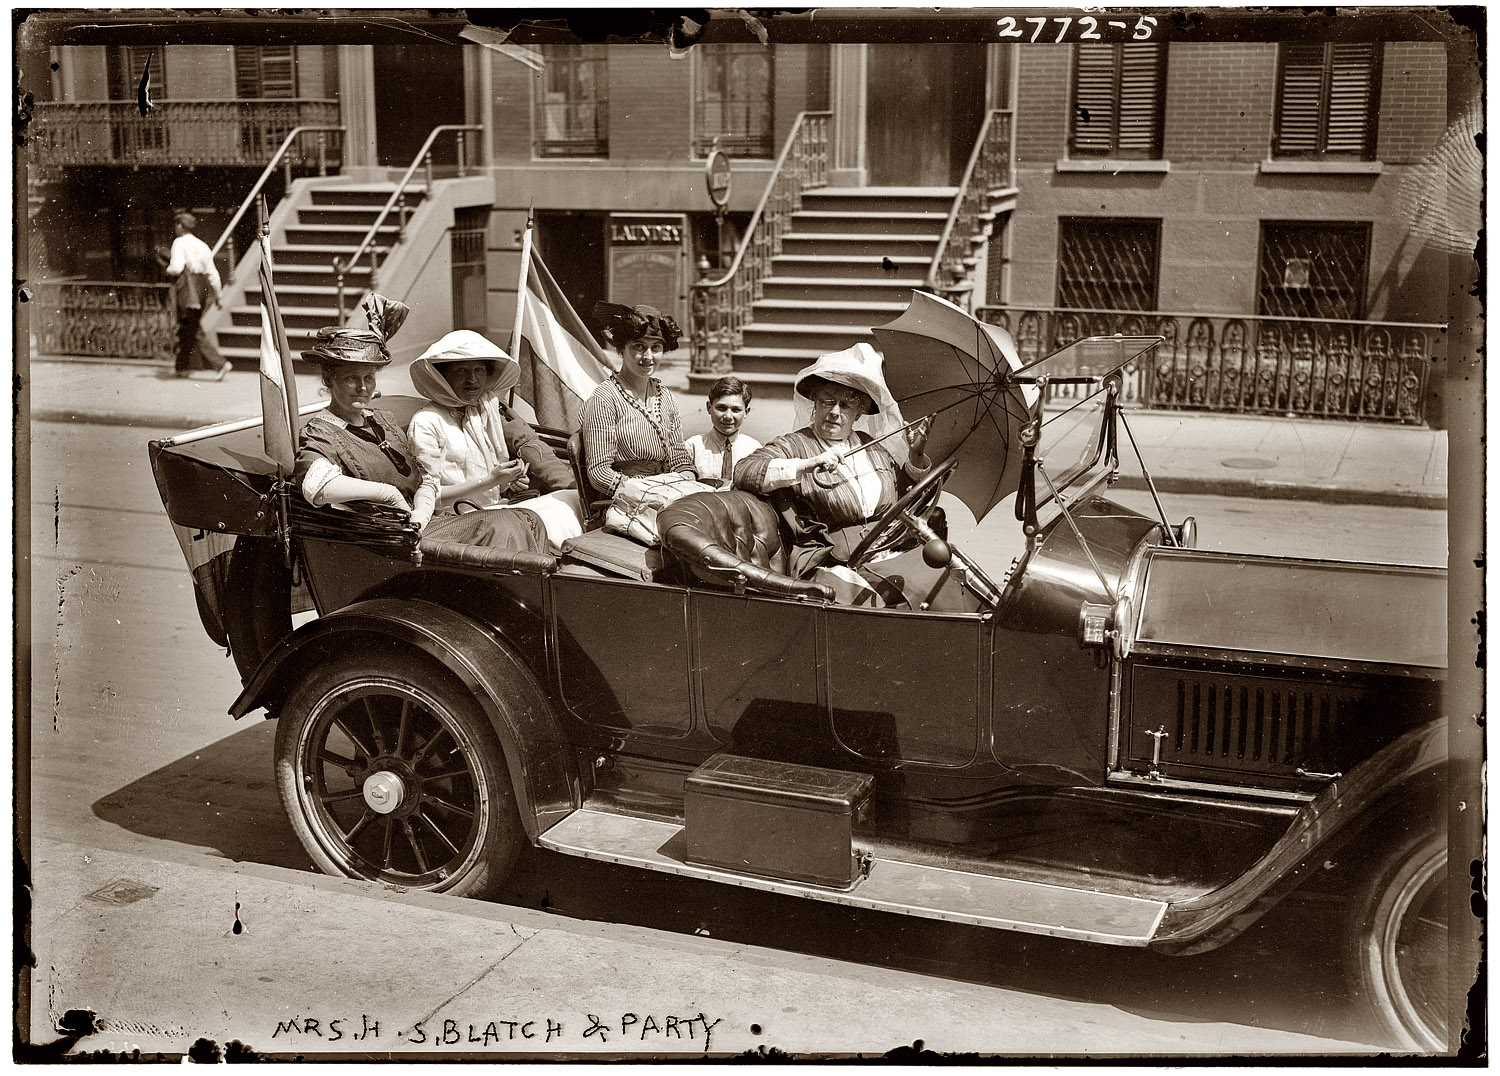 July 30, 1913, New York. Suffragist Harriot Stanton Blatch in the front seat of a Cole touring car with (from left) Susan Fitzgerald, Emma Bugbee and Maggie Murphy. View full size. 5x7 glass negative, George Grantham Bain Collection.